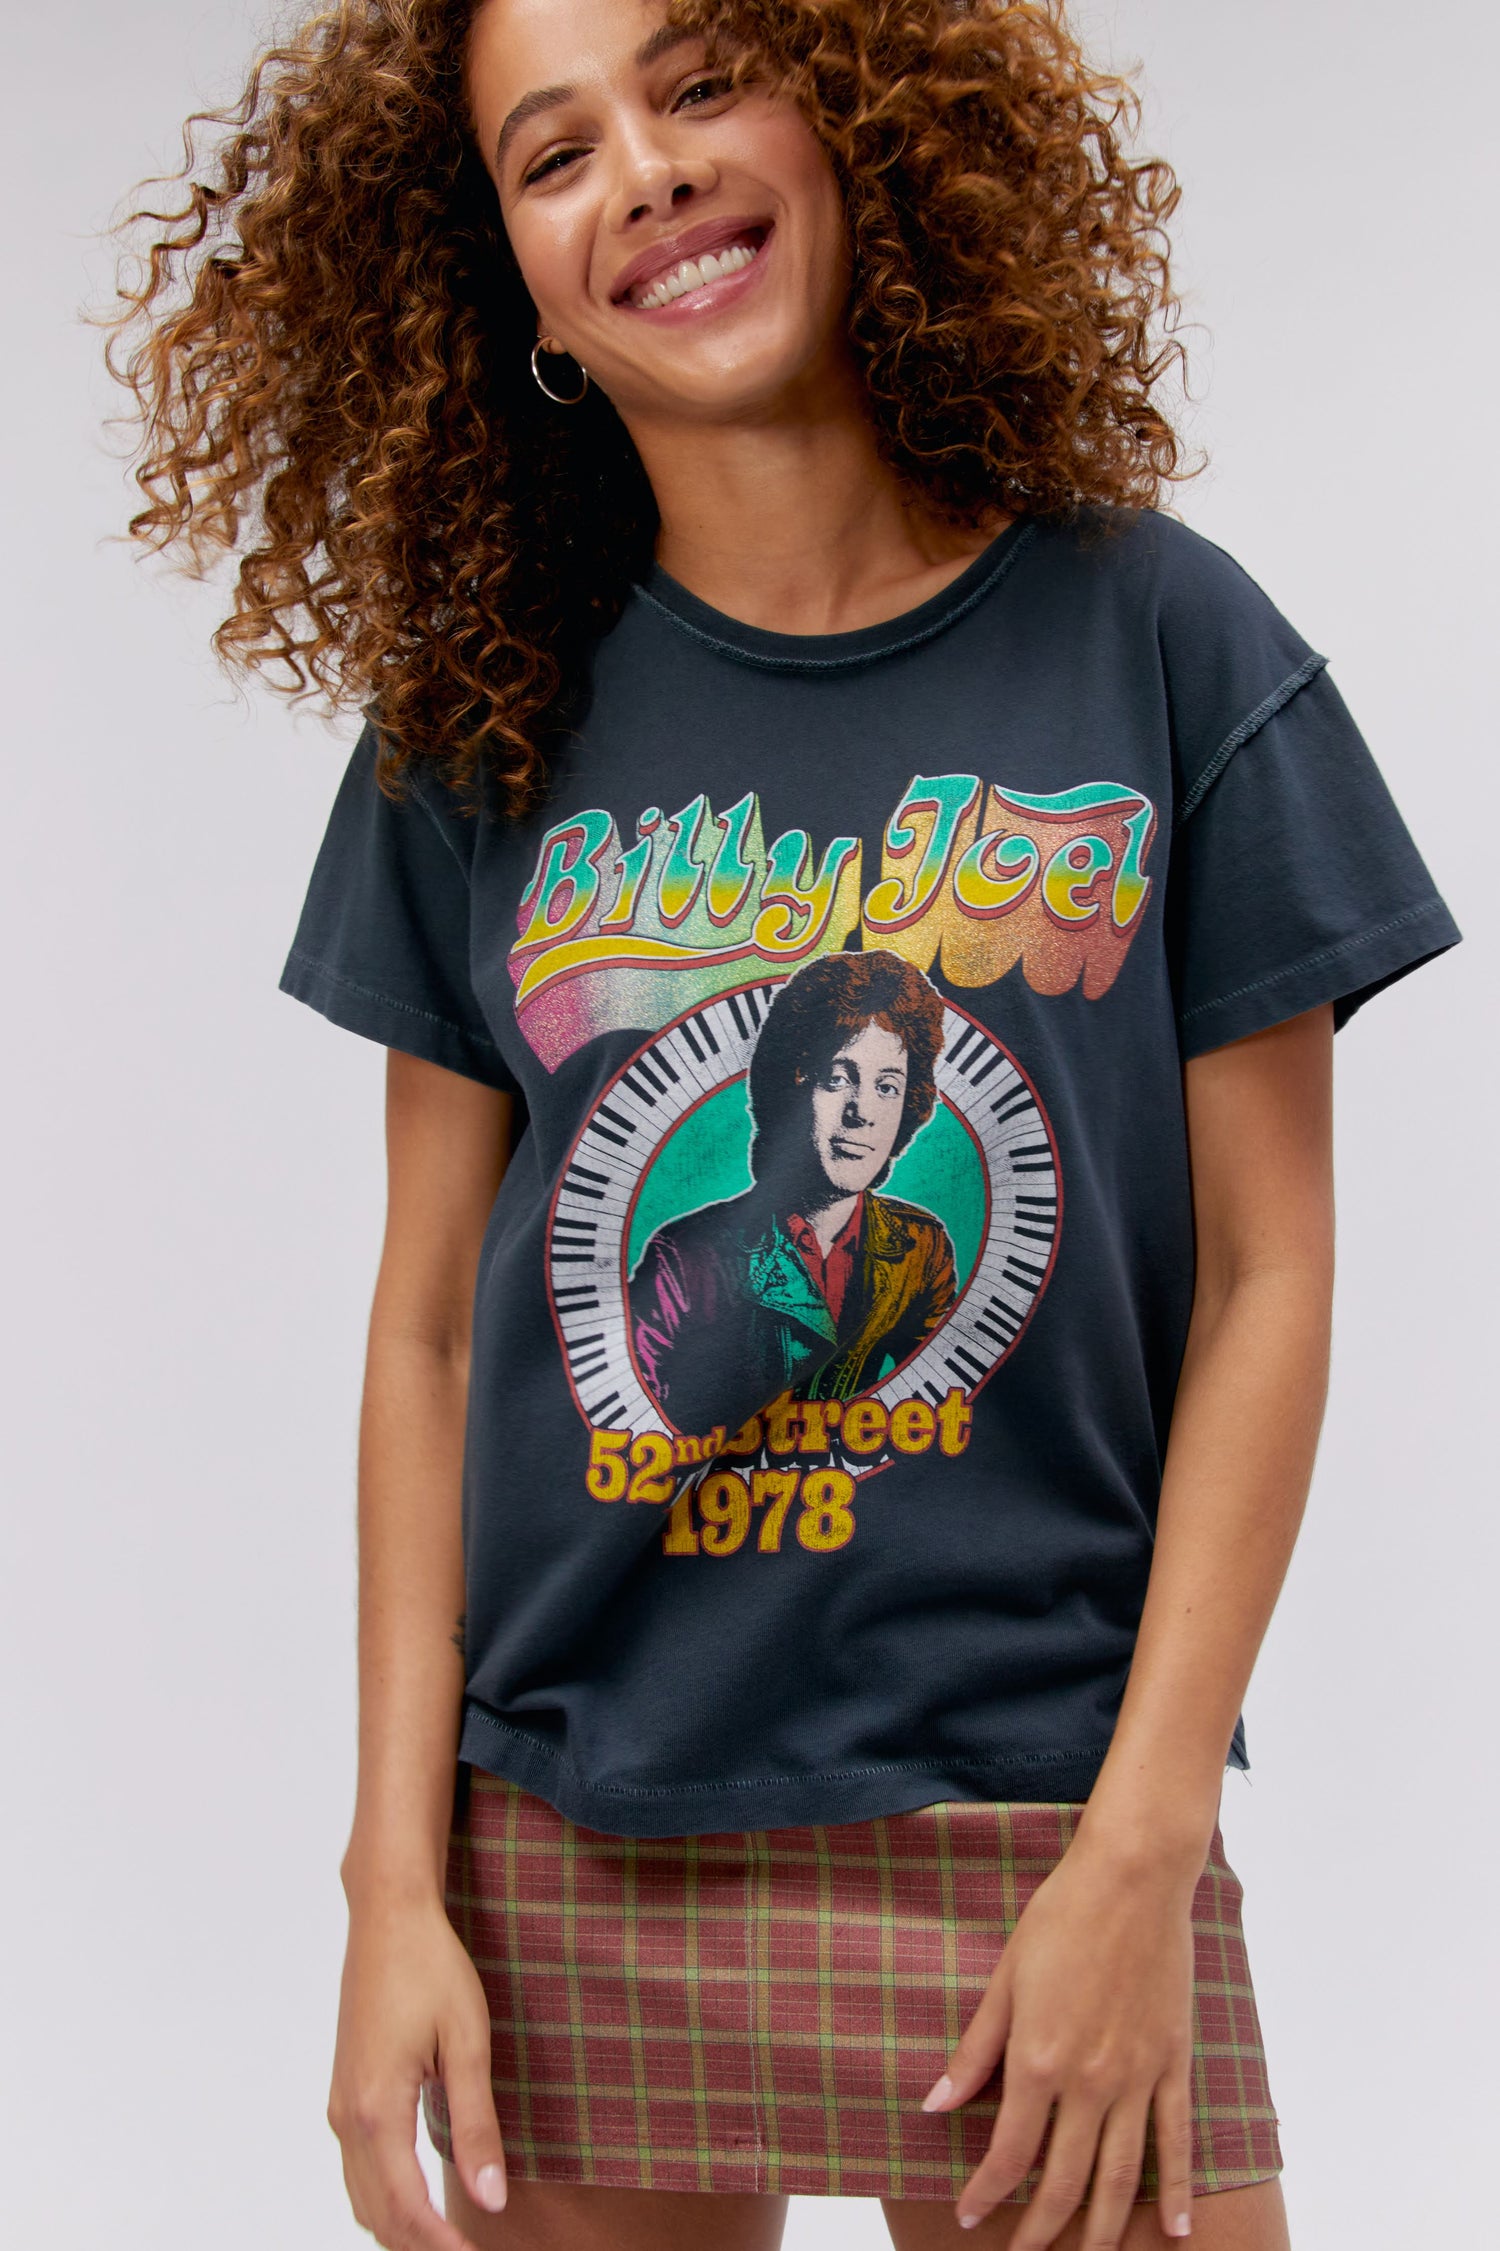 A curly-haired model featuring a black tee stamped with 'Billy Joel' in blue, green, and yellow gradient letters, along with a portrait of the artist in the center.